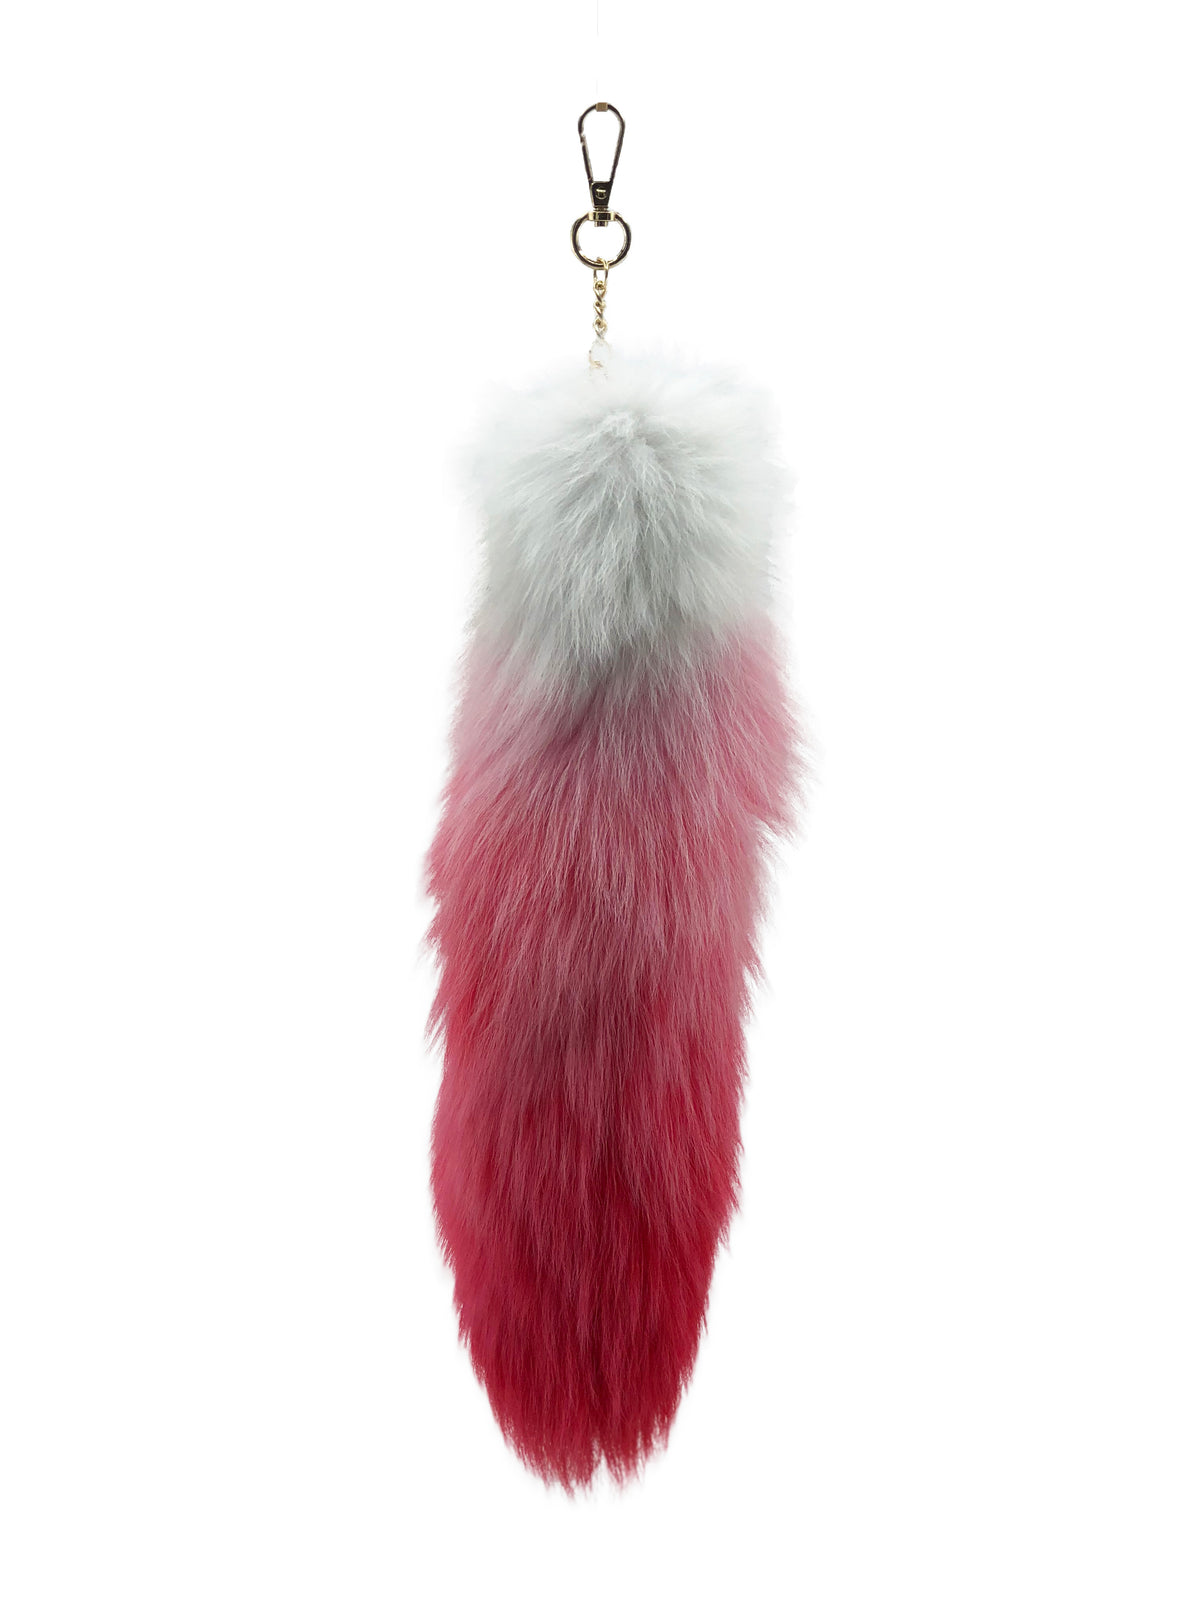 Red and White Clip-on Fox Tail Keychain - paulamariecollection